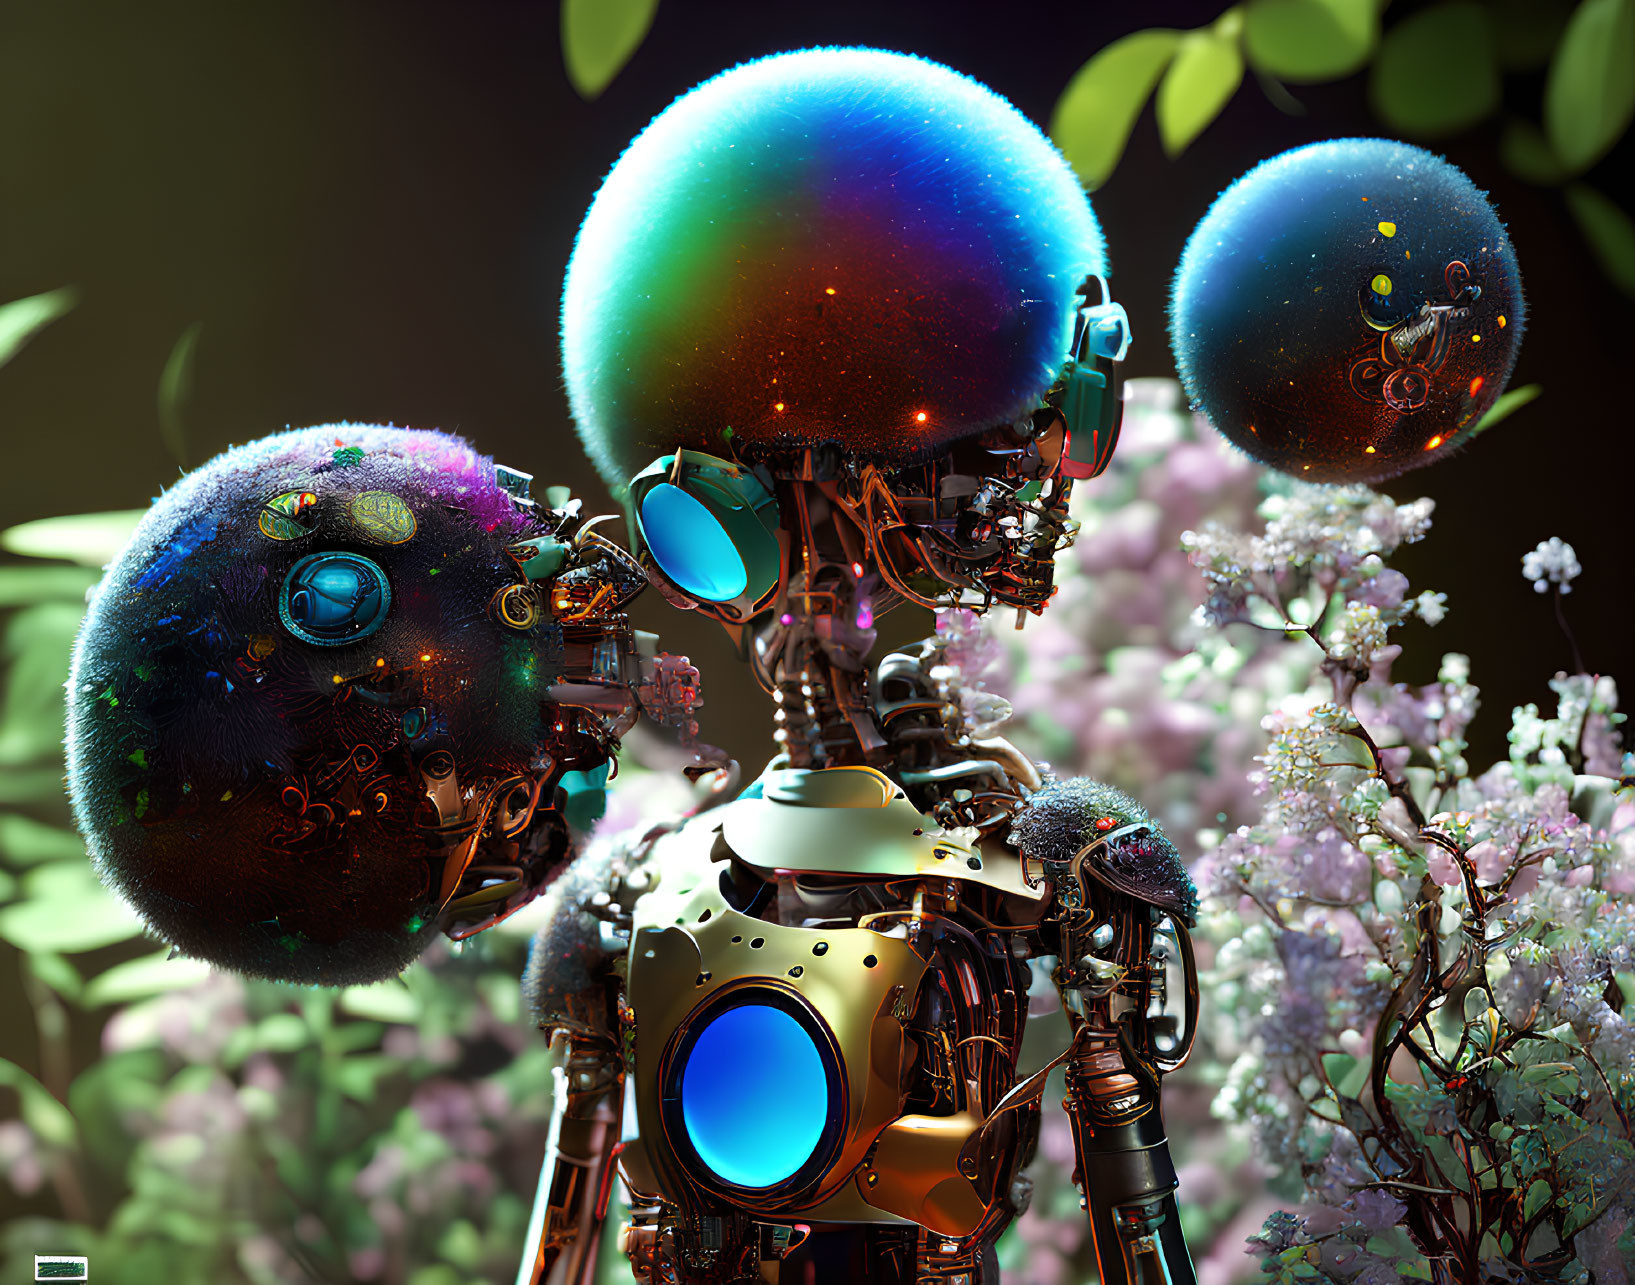 Futuristic robot with holographic heads among blooming flowers